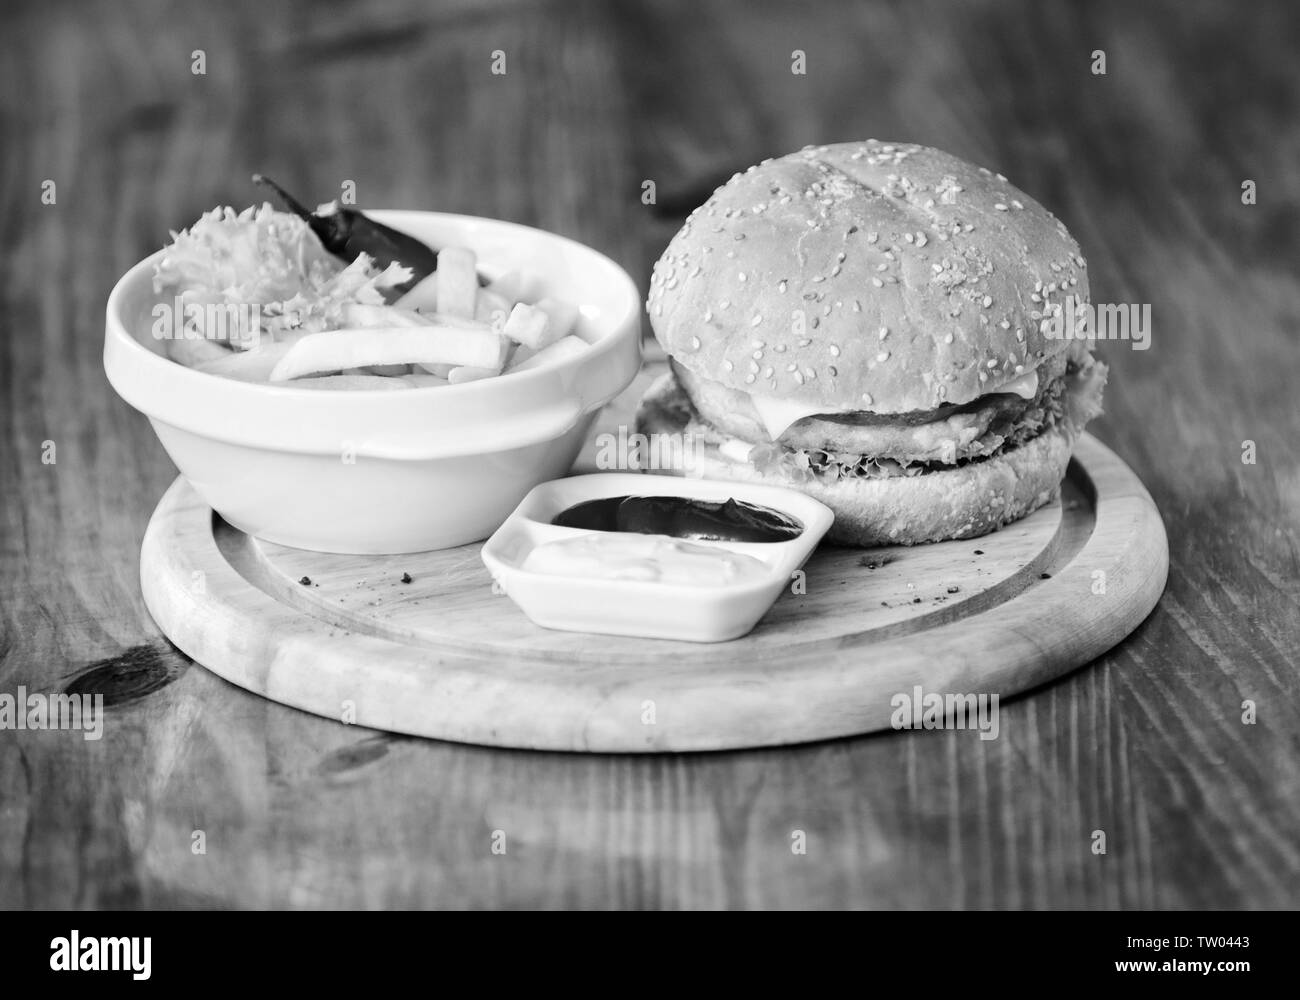 Fast food concept. High calorie snack. Burger menu. Hamburger with sesame seeds and french fries and tomato sauce on wooden board. Delicious burger. Burger with cheese meat and salad. Pub food. Stock Photo